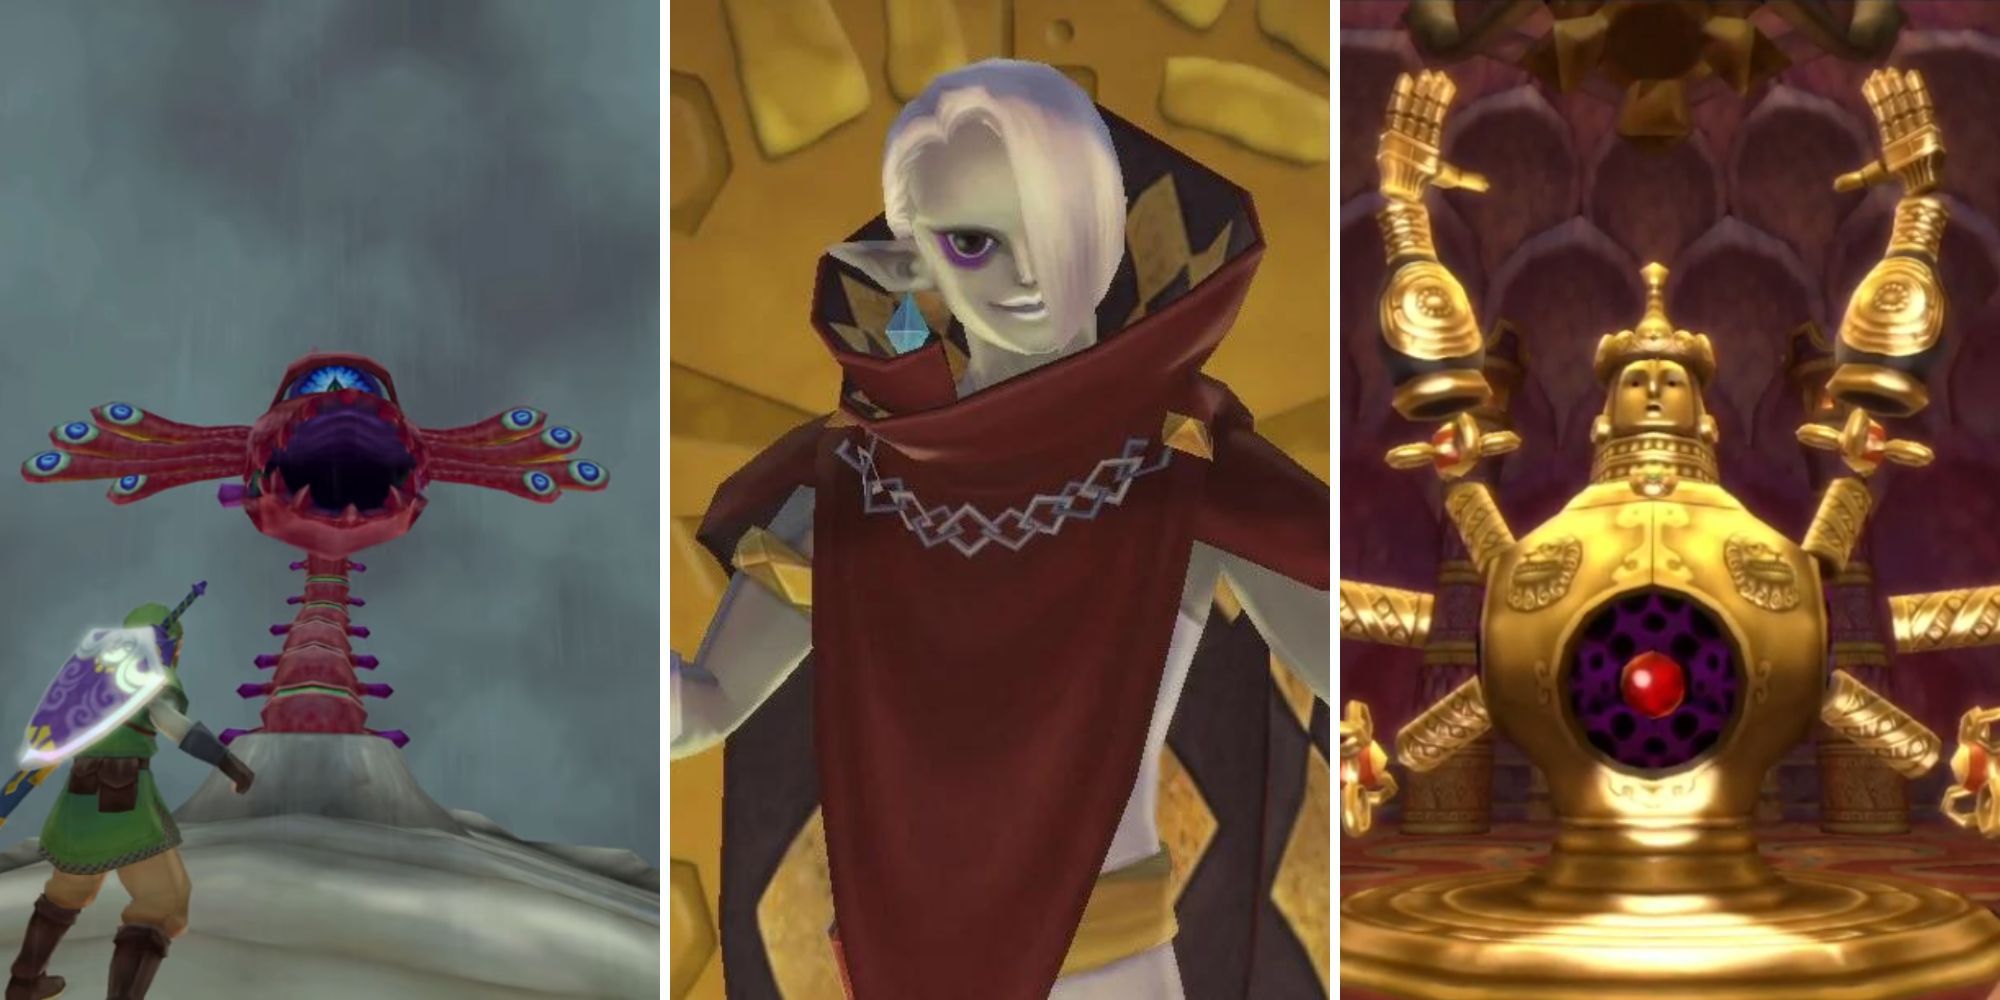 The Bilocyte roars at Link, Ghirahim opens his arms, Koloktos assembles his body